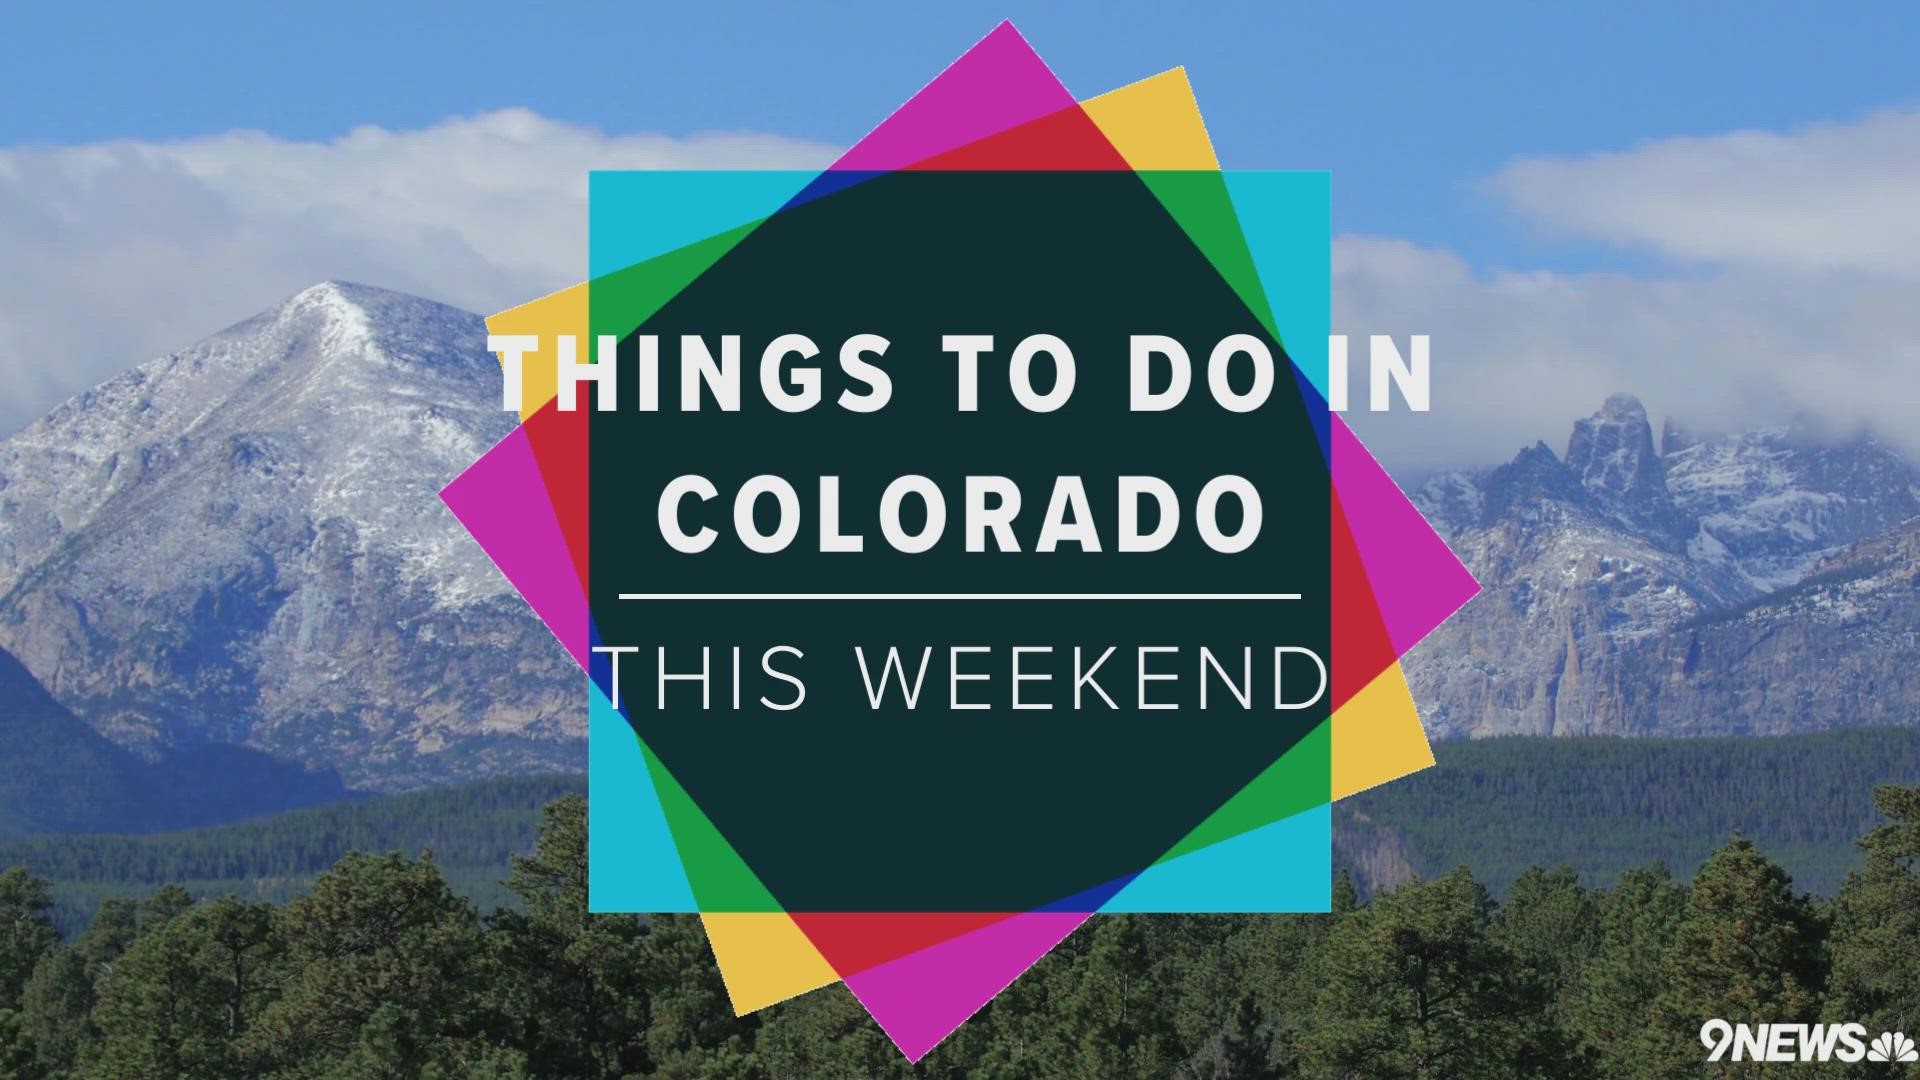 County fair season begins in Colorado, Artsweek returns in Golden and a new roller coaster offers high-altitude thrills.